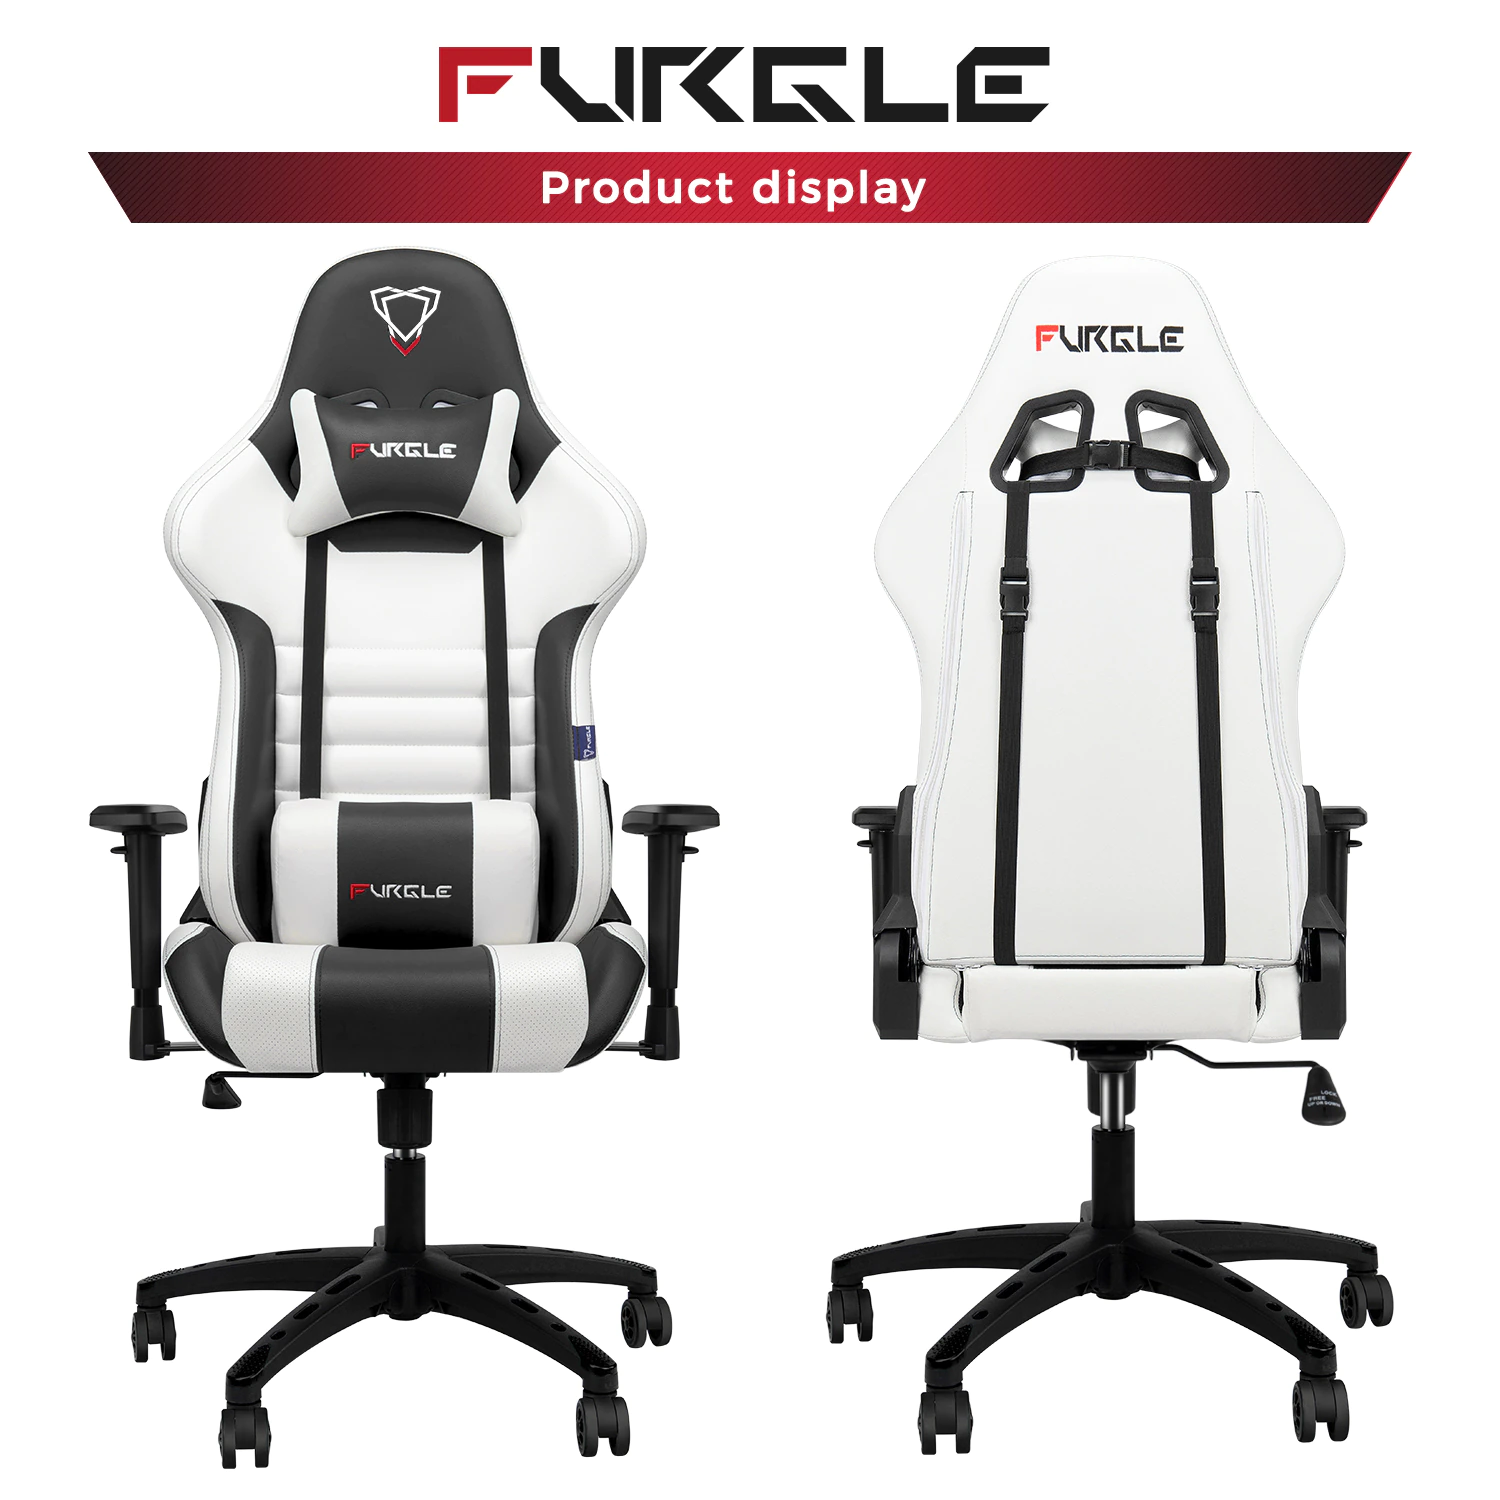 Furgle 7 DASY DELIVERY WCG Gaming Chair Computer Chair for Office Chair Furnitur 